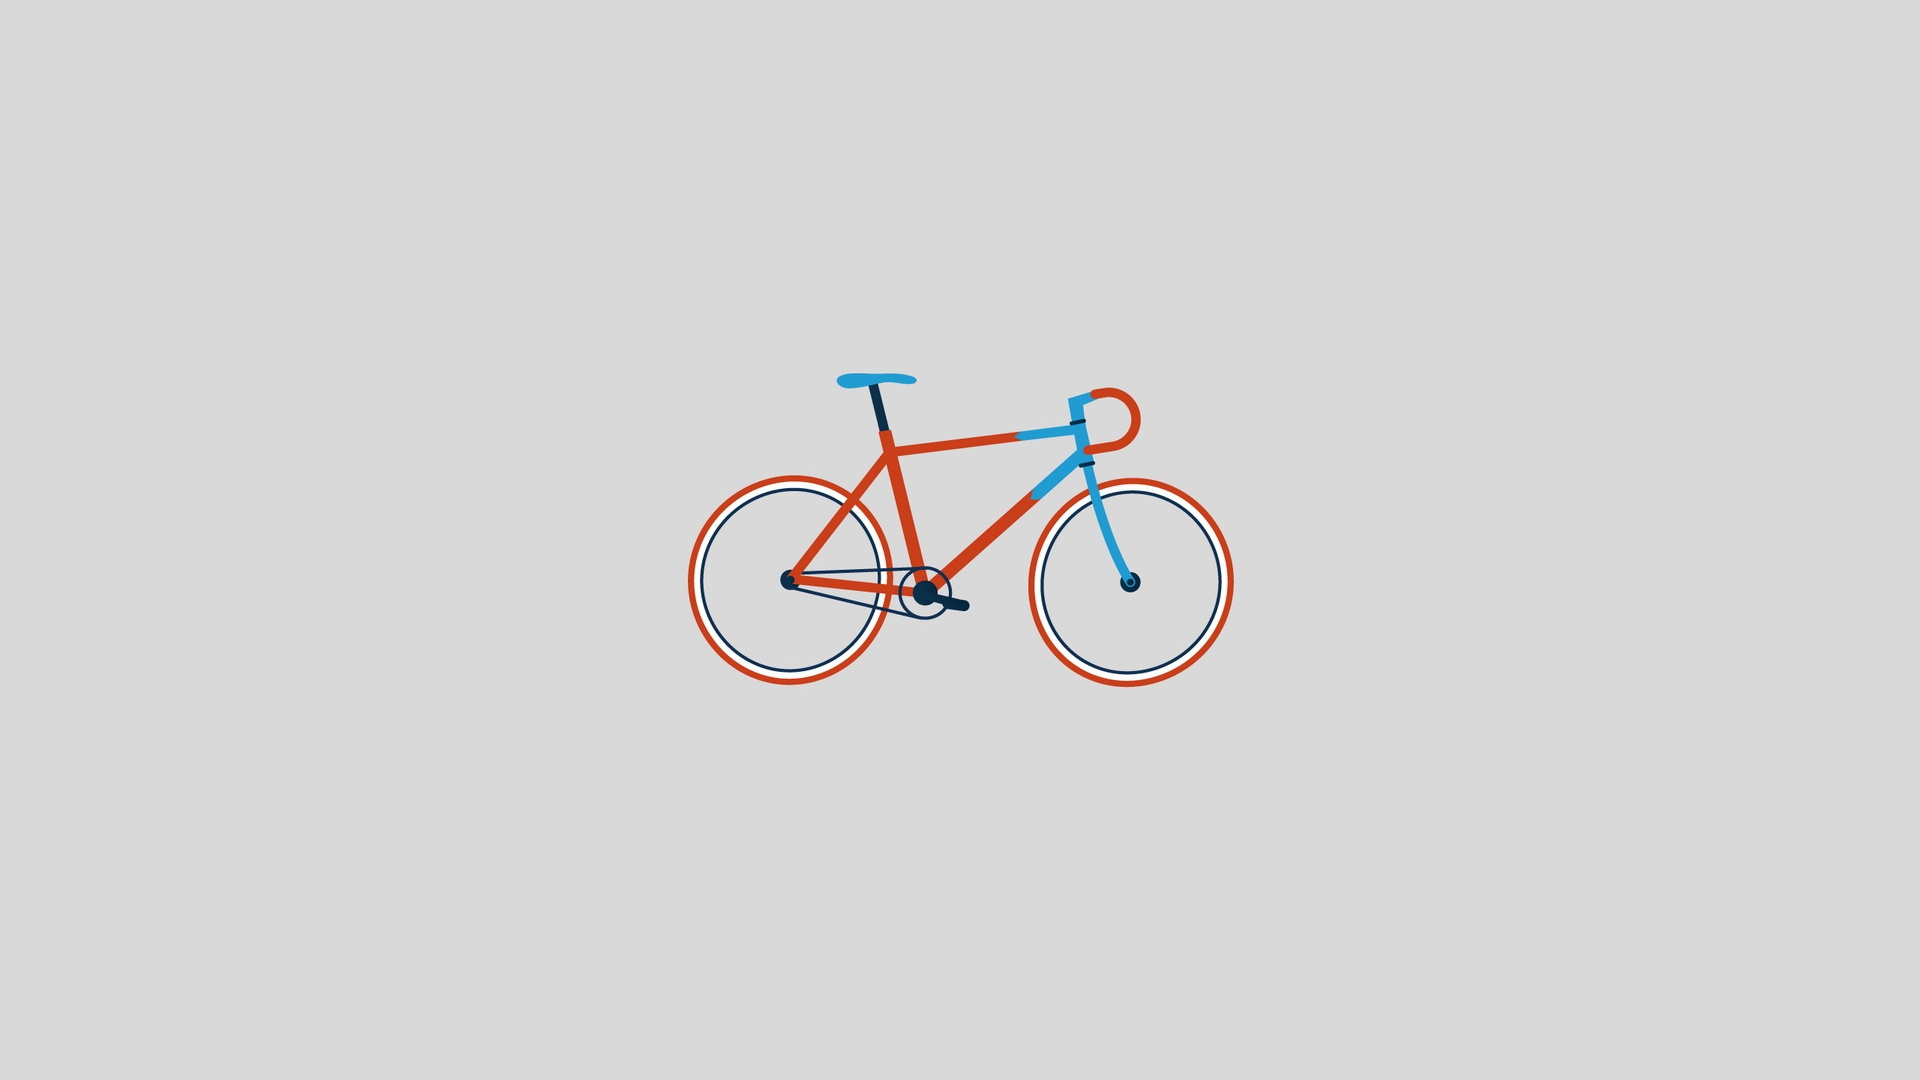 Orange and Black Bicycle Illustration. Wallpaper in 1920x1080 Resolution